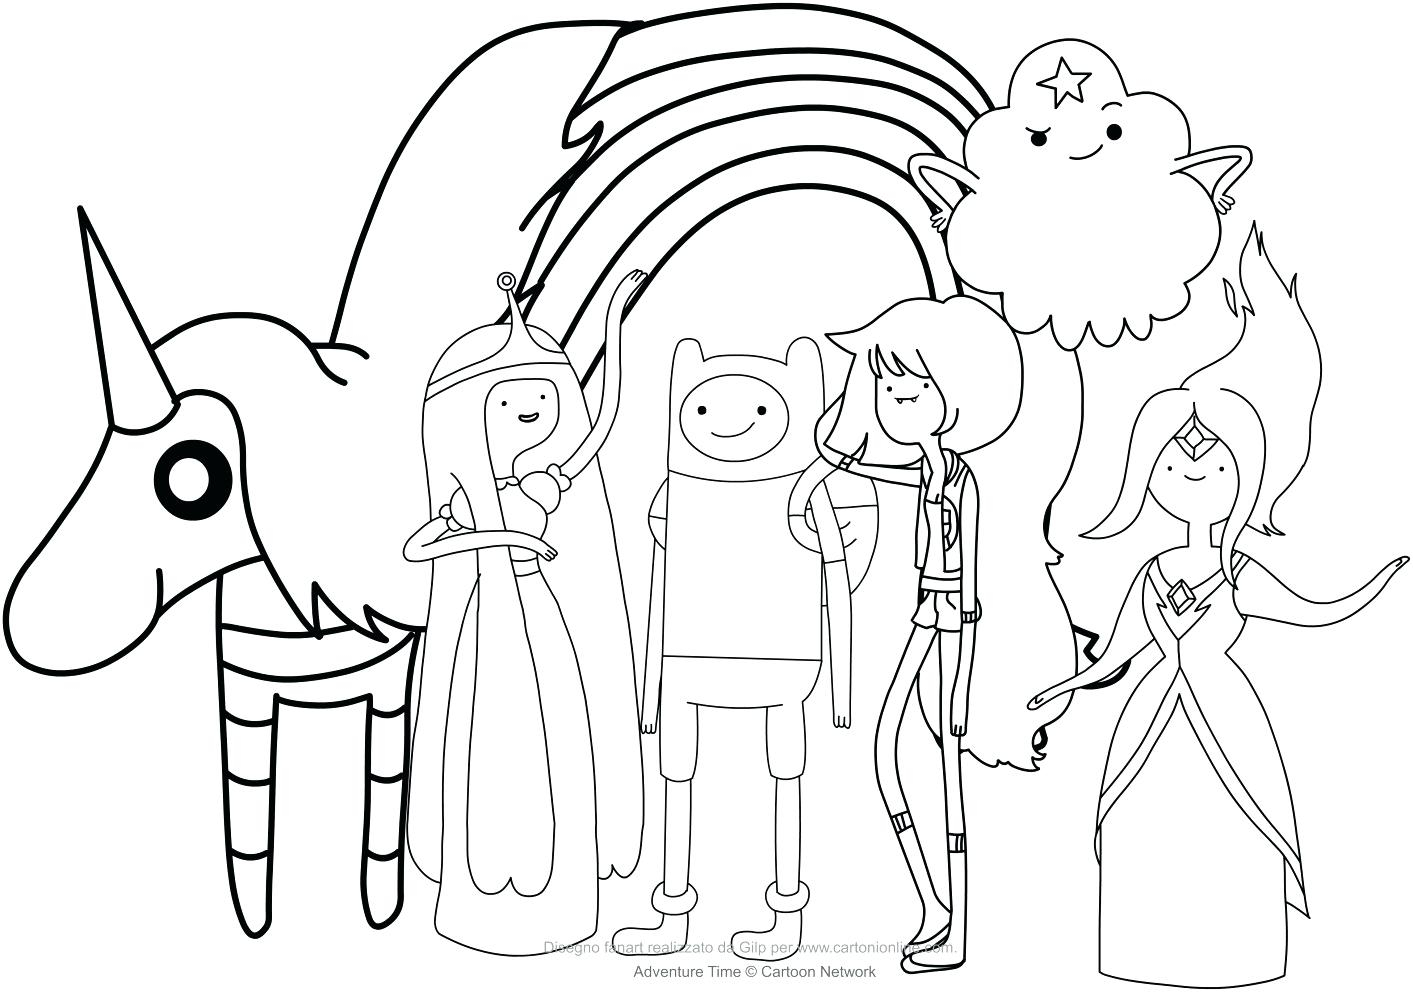 Printable Adventure Time Coloring Pages Free Adventure Time Coloring Pages Spartanprintco